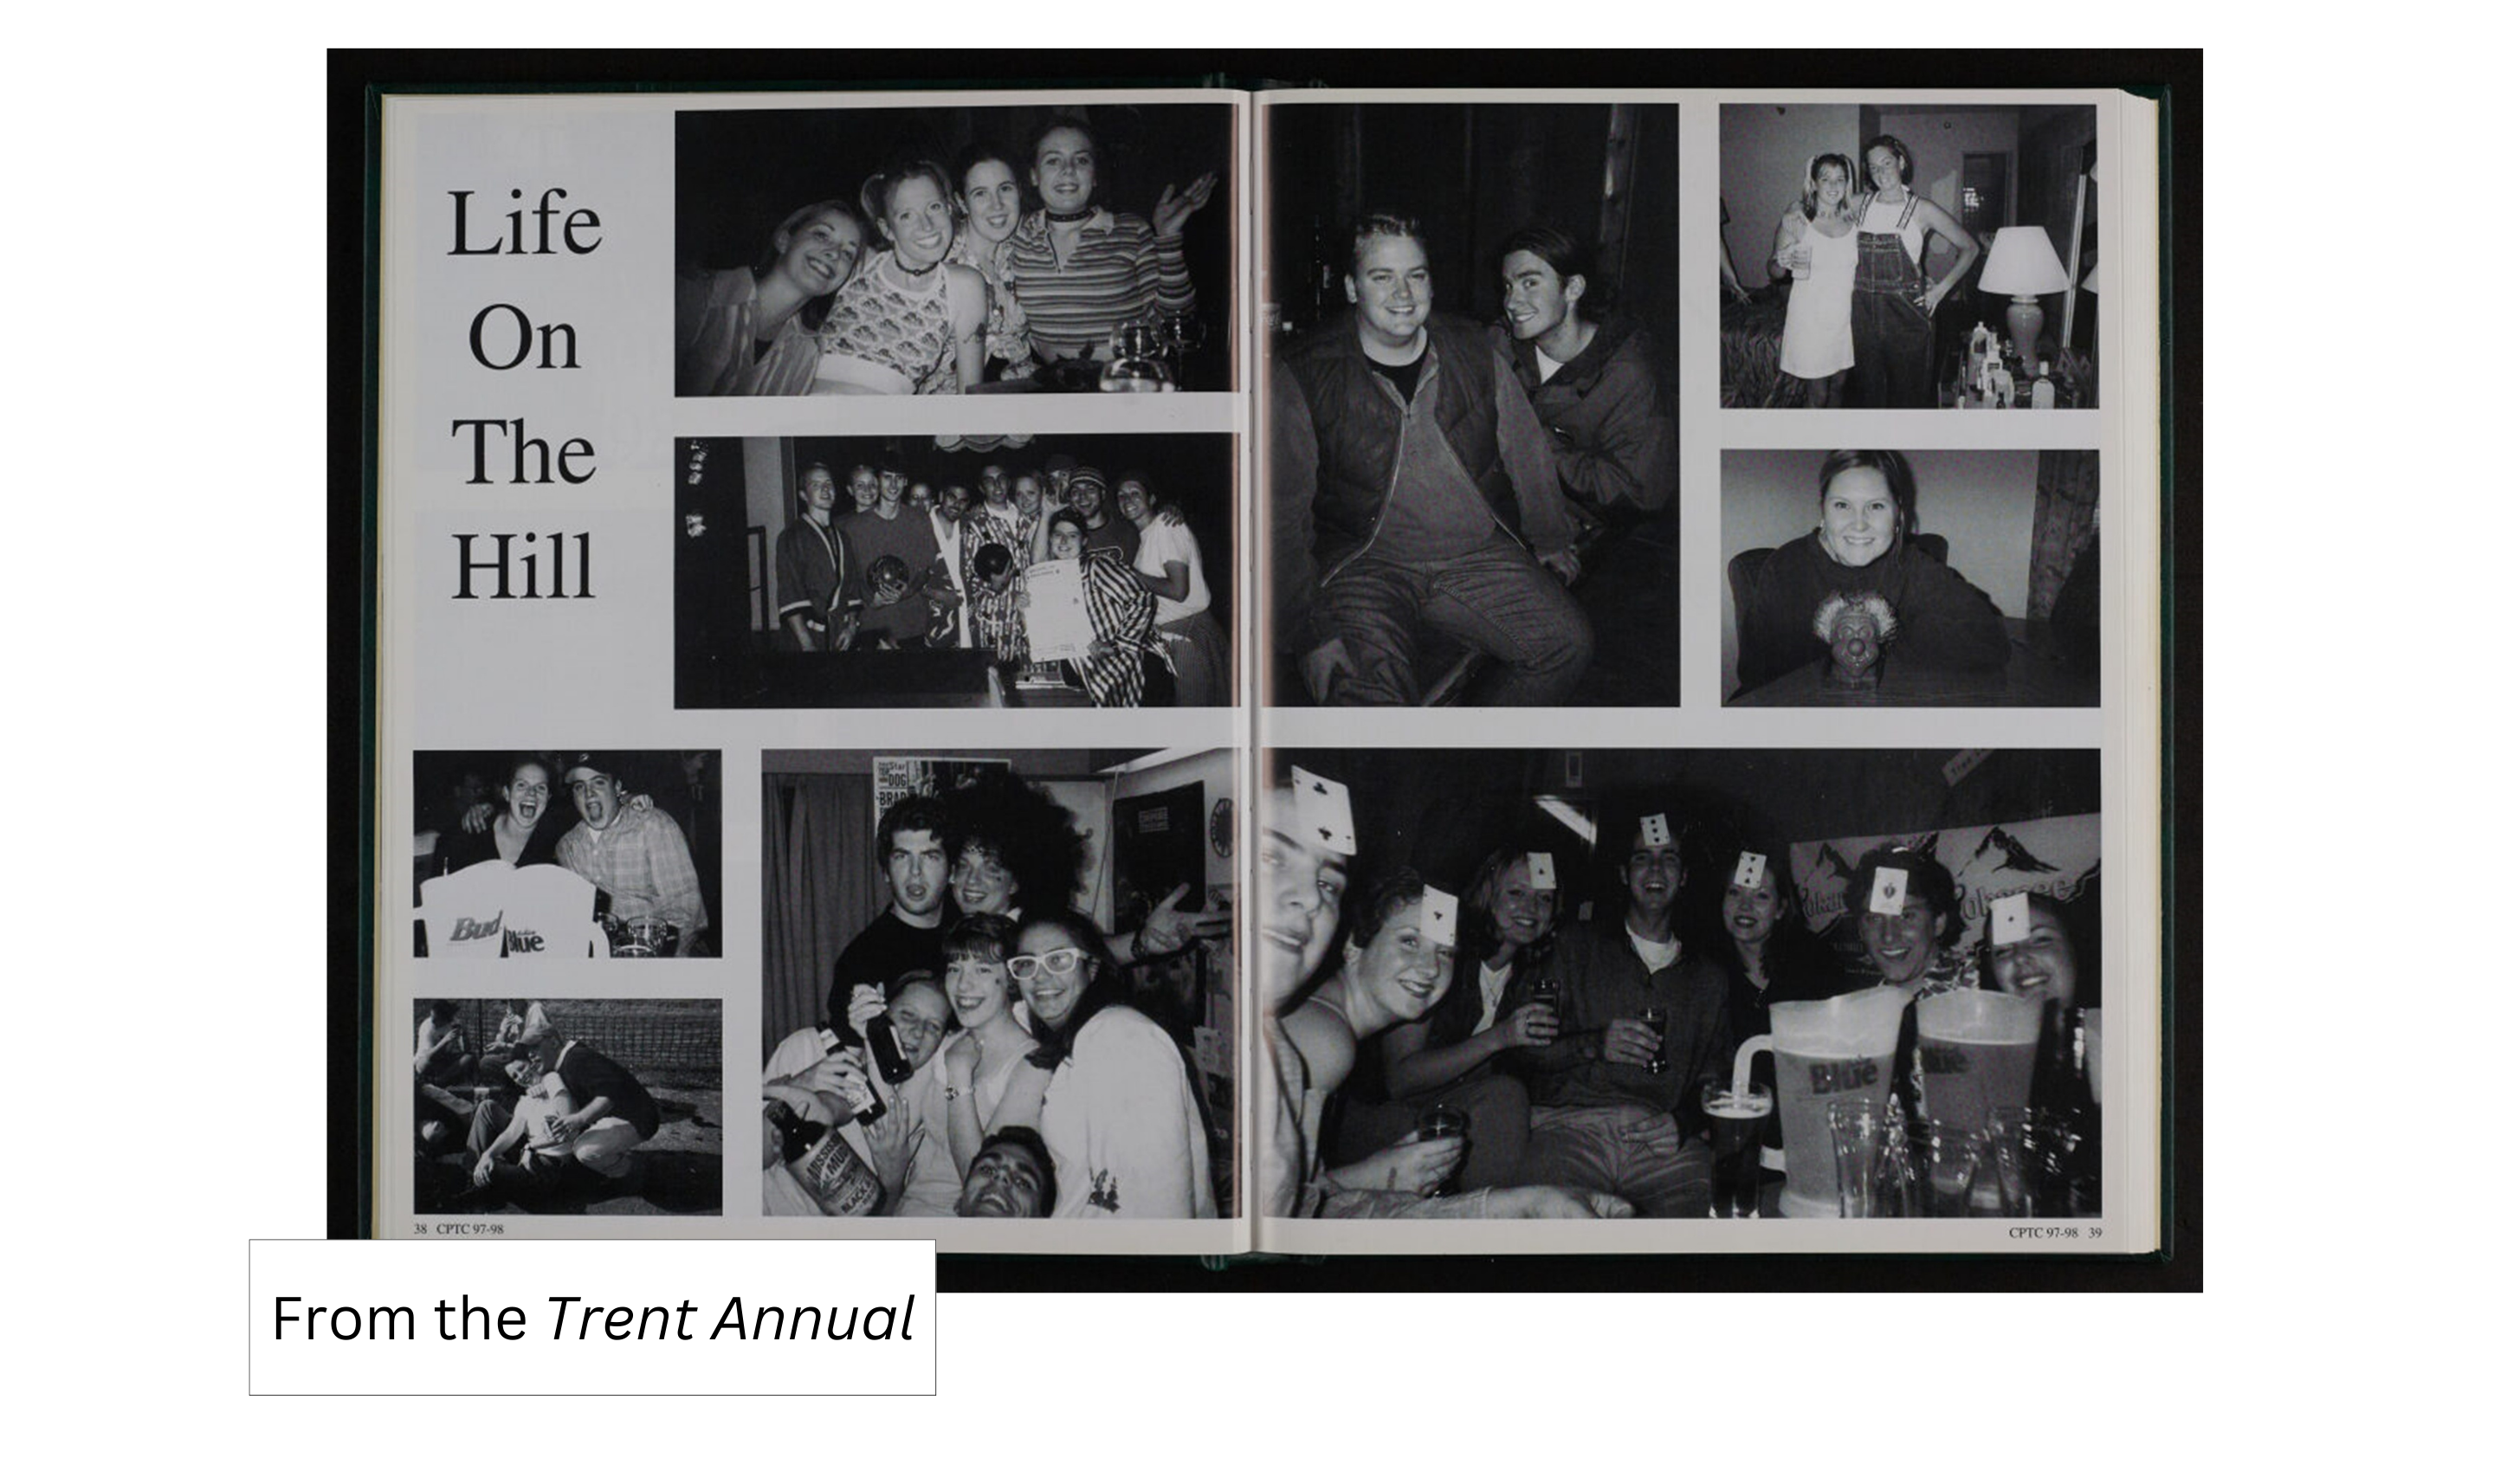 Images from the Trent Annual